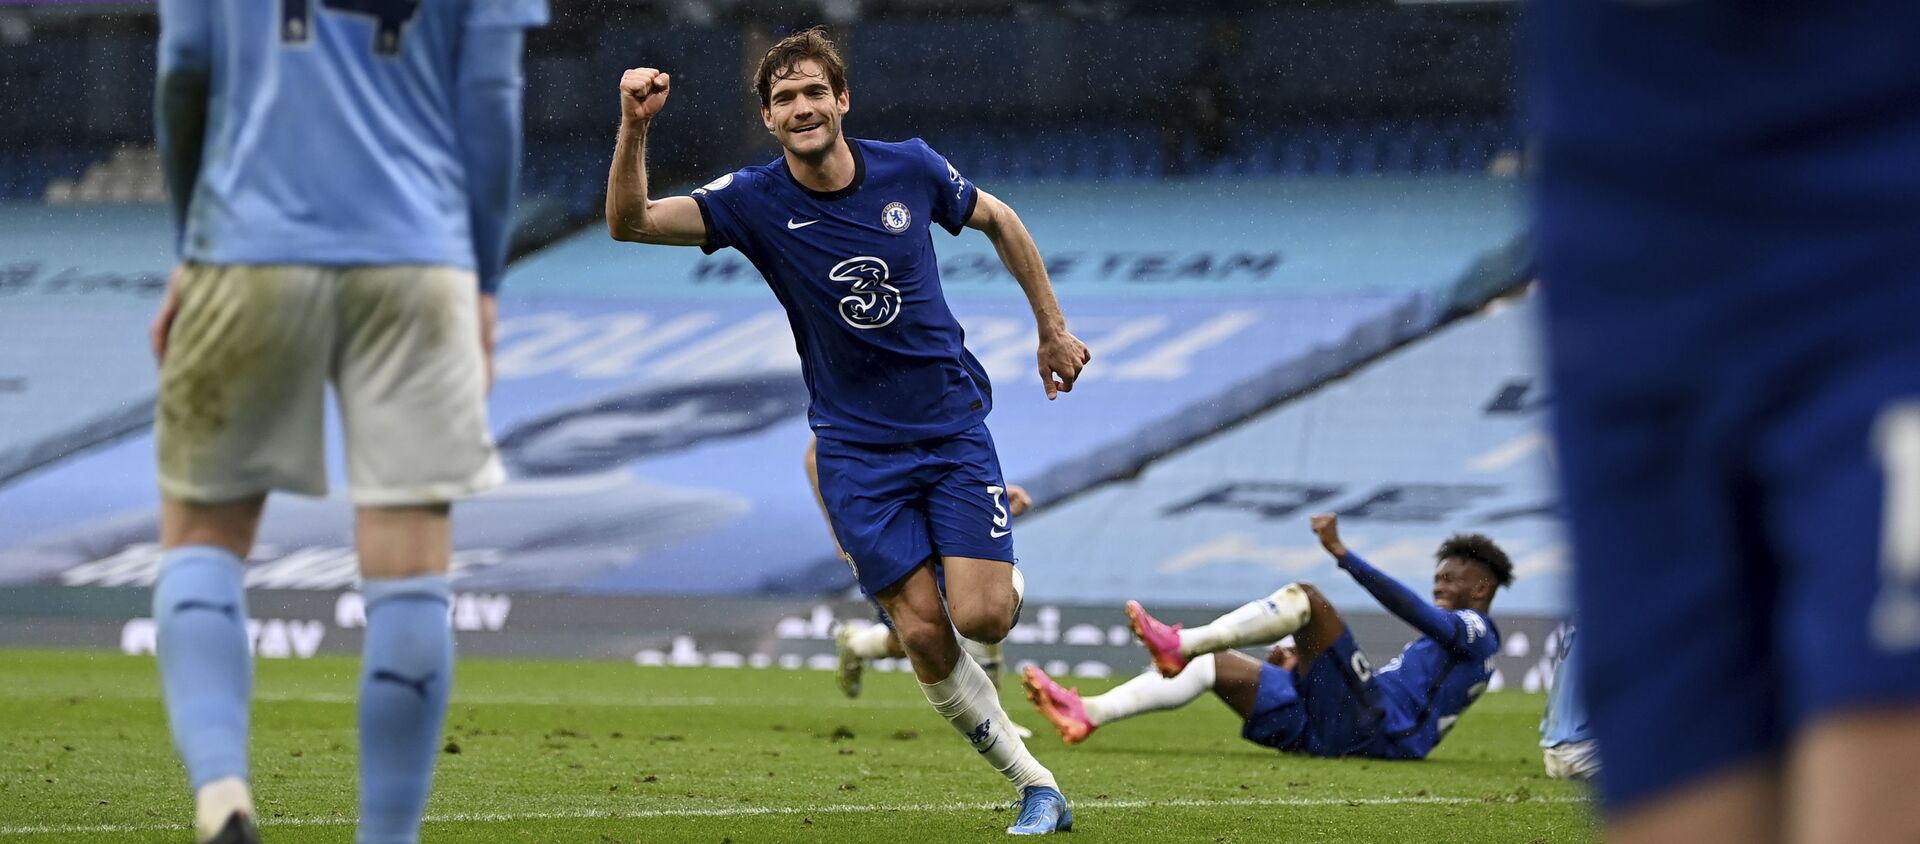 Chelsea's Marcos Alonso celebrates after scoring the winner in Premier League match against Manchester City in May 2021. - Sputnik International, 1920, 10.05.2021